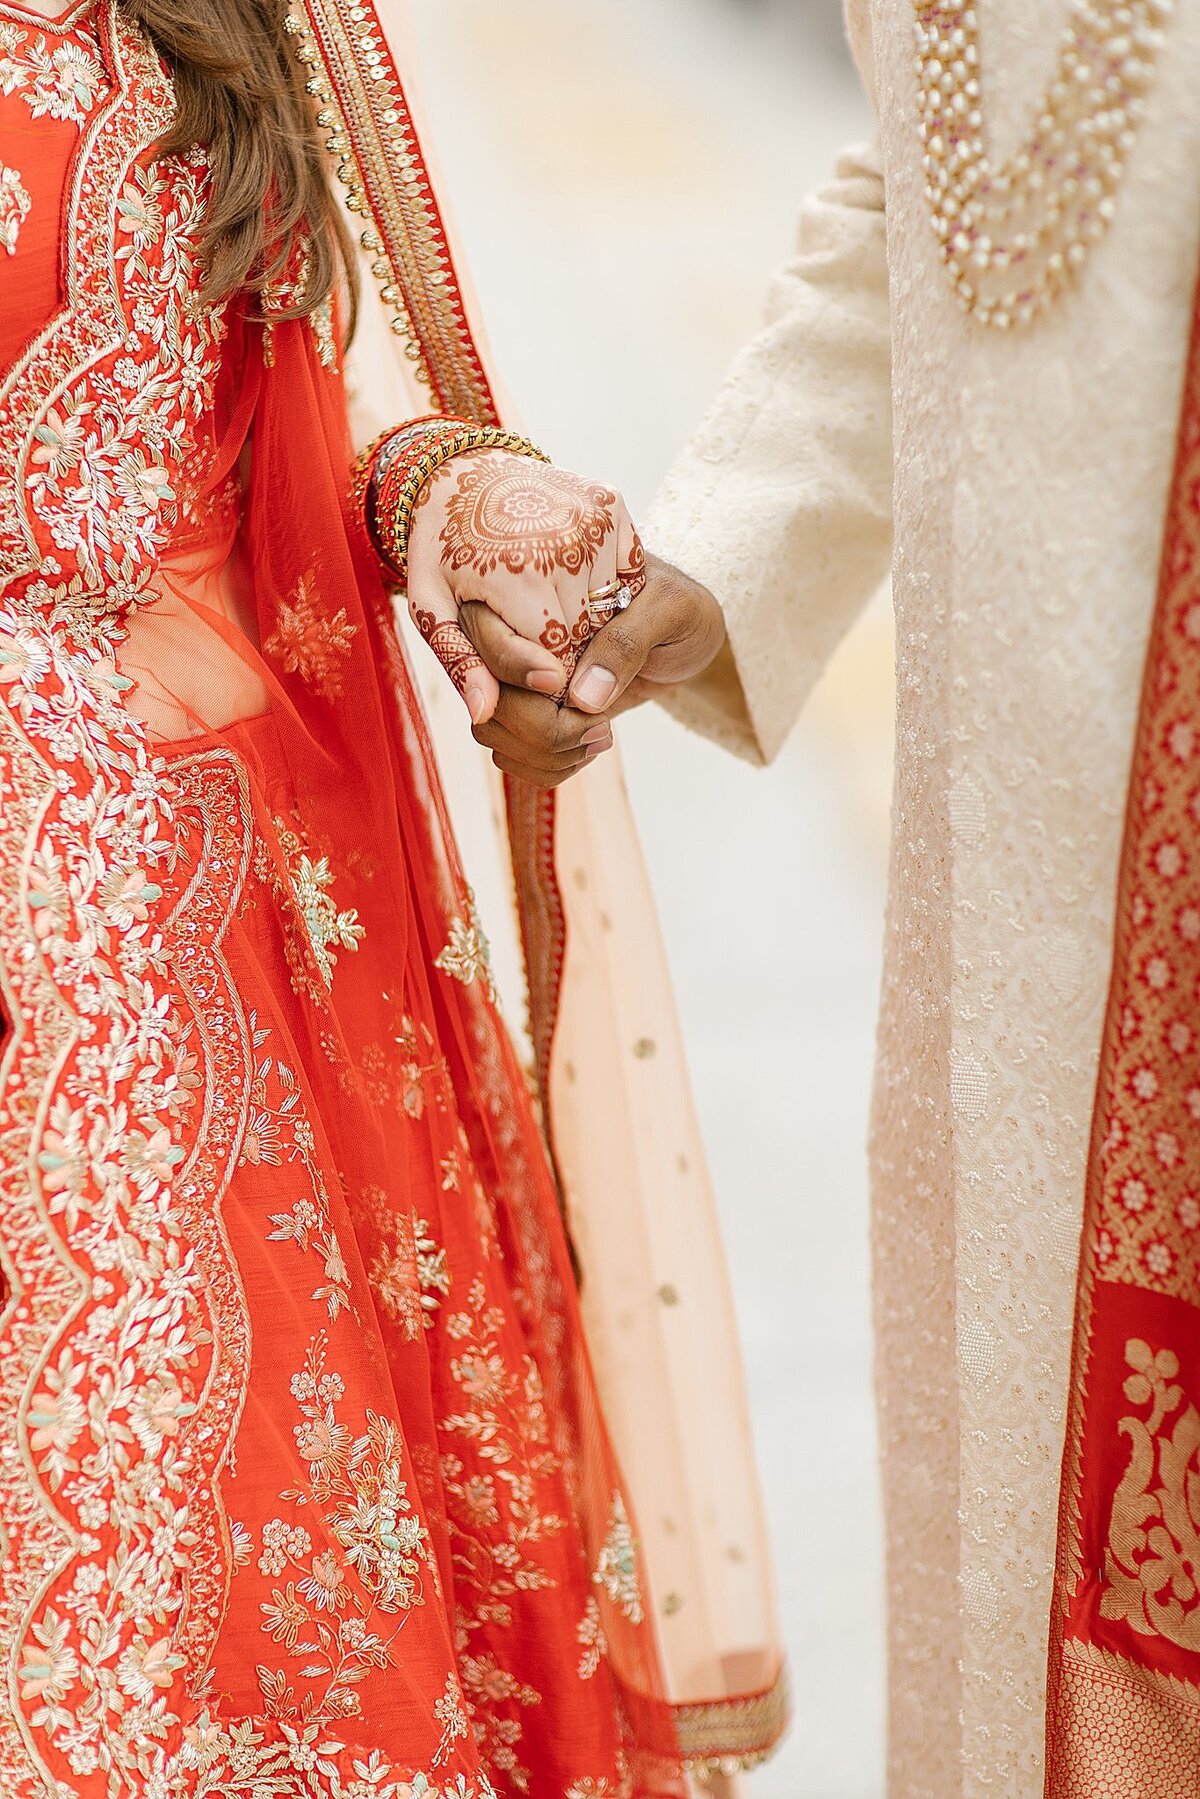 Hindu bride dressed in a red and gold saree and Indian groom dressed in a white and red sherwani hold hands at their Indian Wedding in Nashville, TN